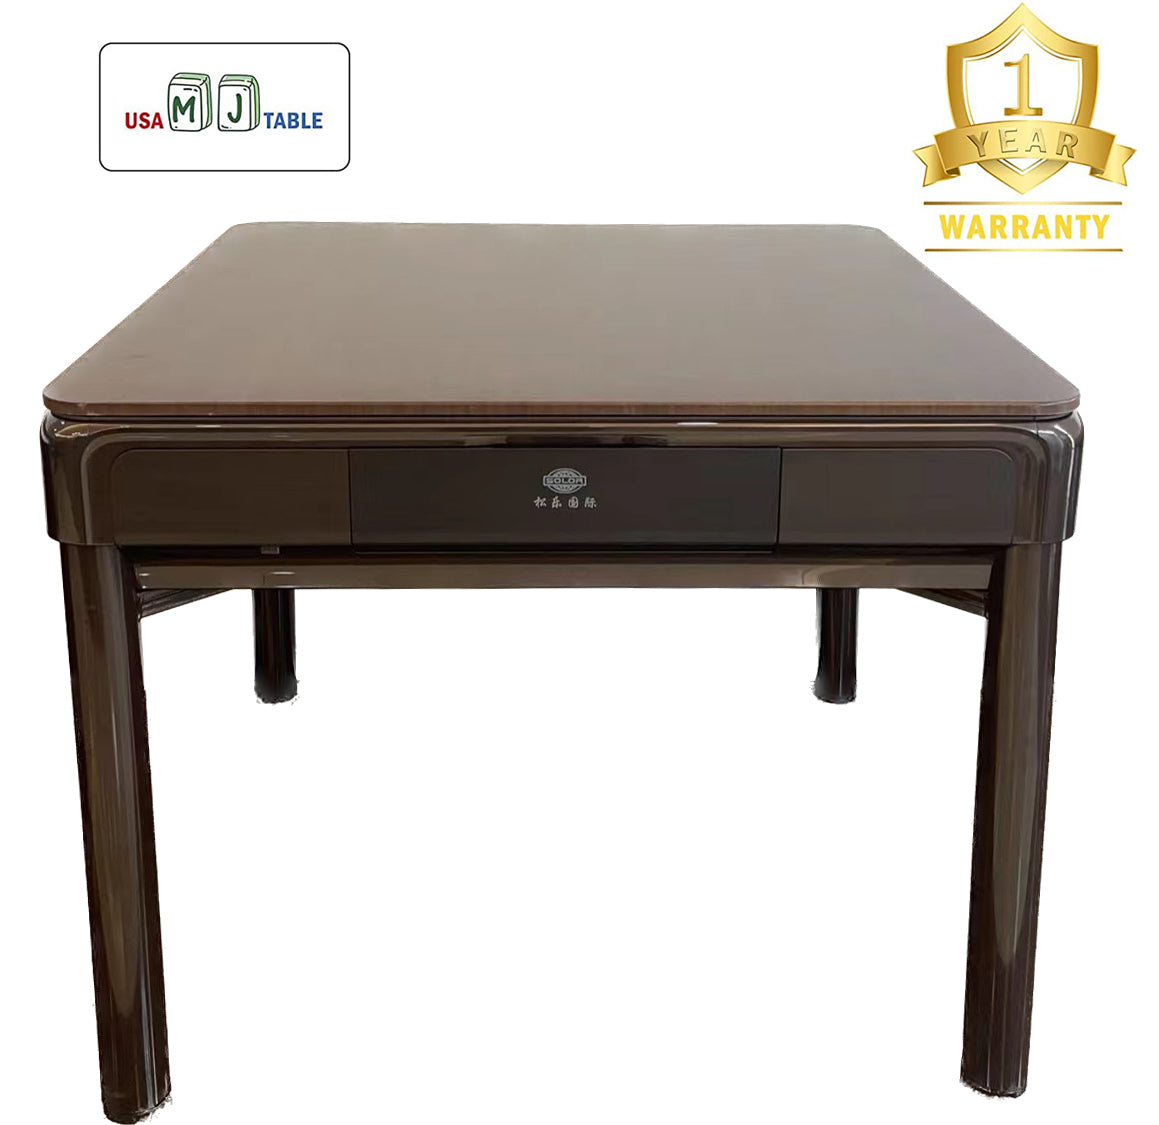 MJ-BST 松乐四腿餐桌款电动麻将桌 Automatic Mahjong Table Coffee Color 4-Legs Dining Table Style with No-Numberes Chinese Style tiles 适配中式无数字牌